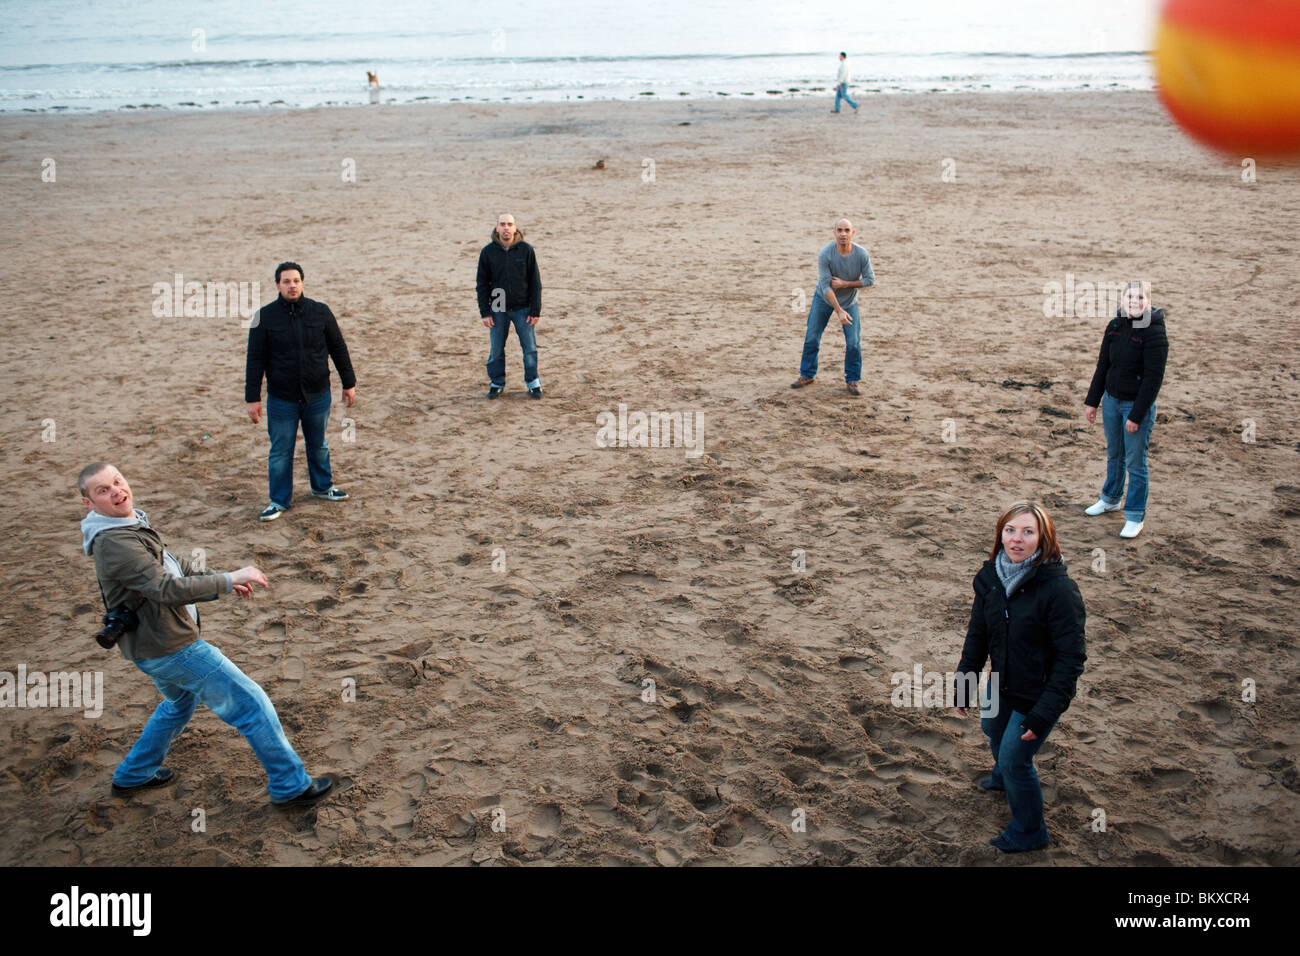 Young people play ball on the beach in Barry Island near Cardiff, UK. Stock Photo